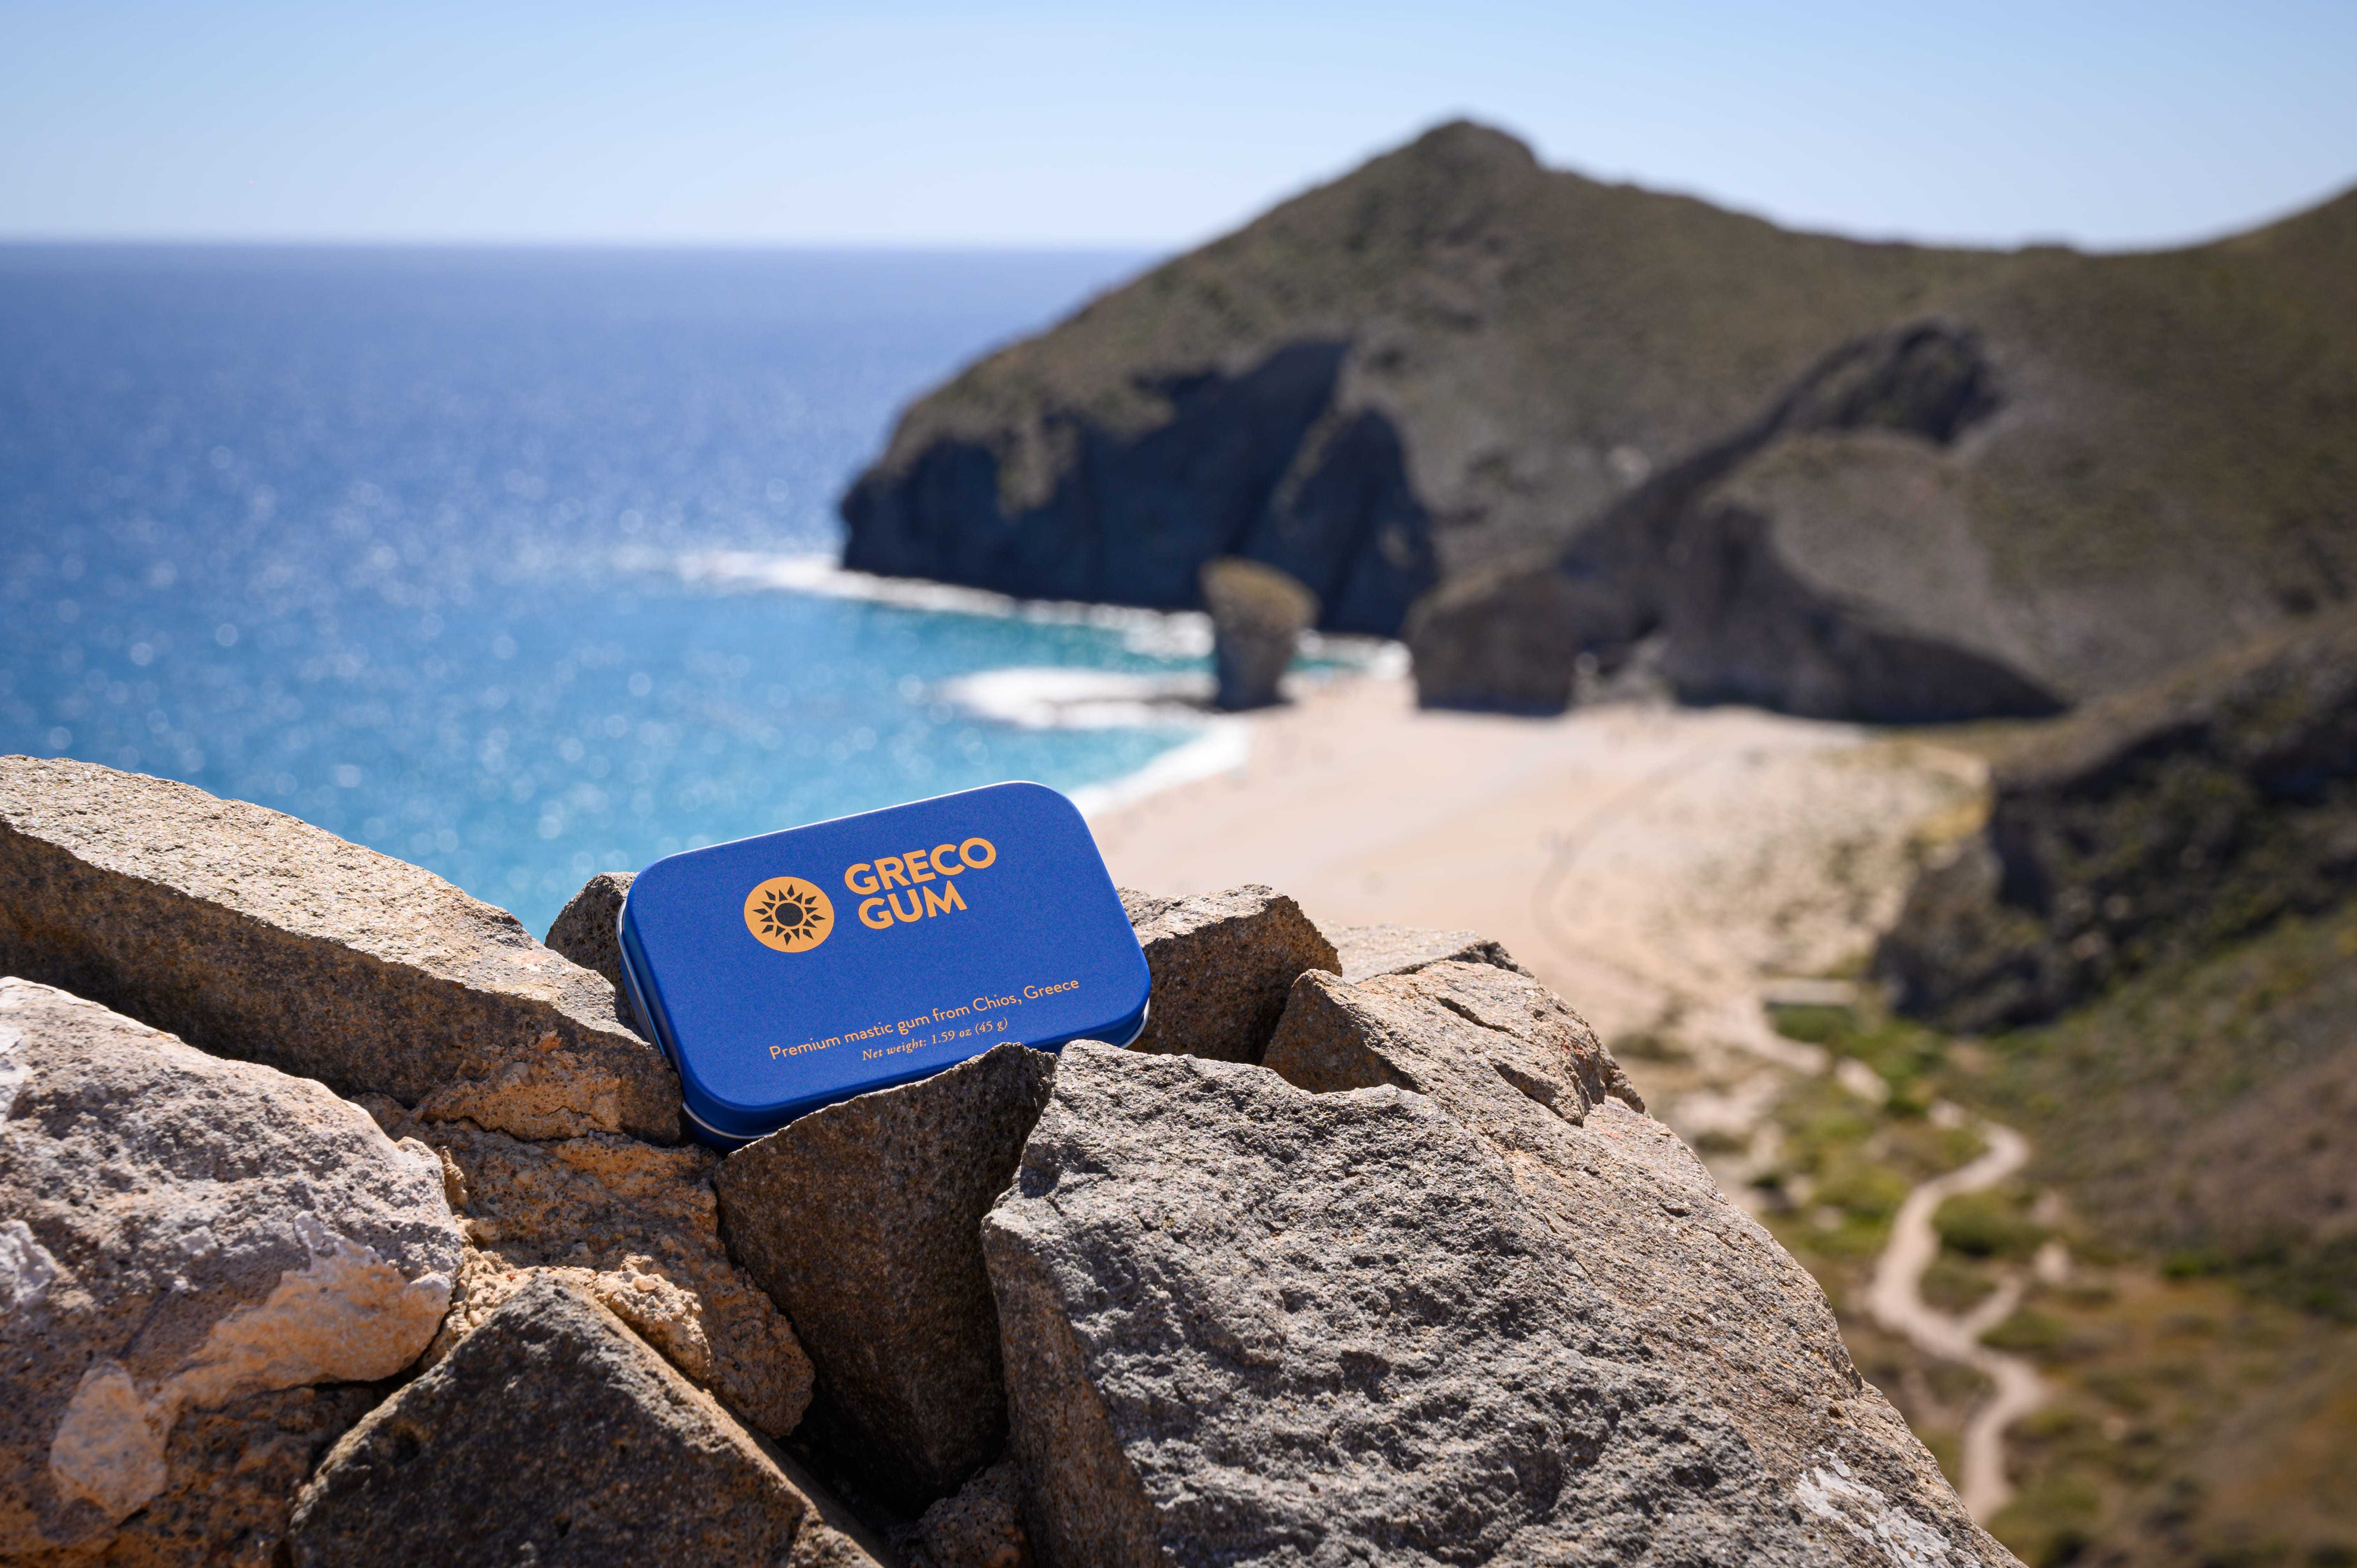 Tin of Greco Gum perched on a cliff side overlooking the Mediterranean Sea.